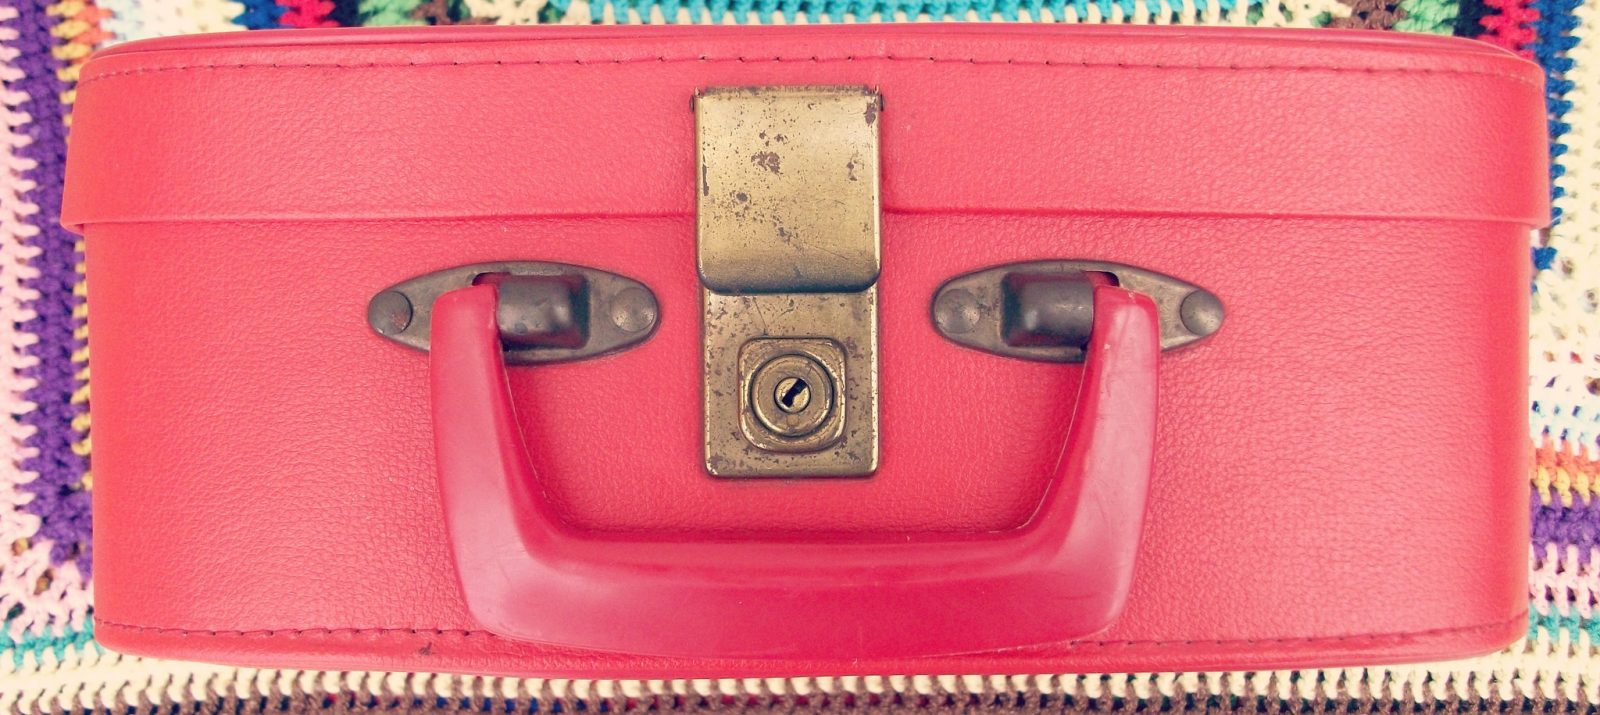 small red suitcase